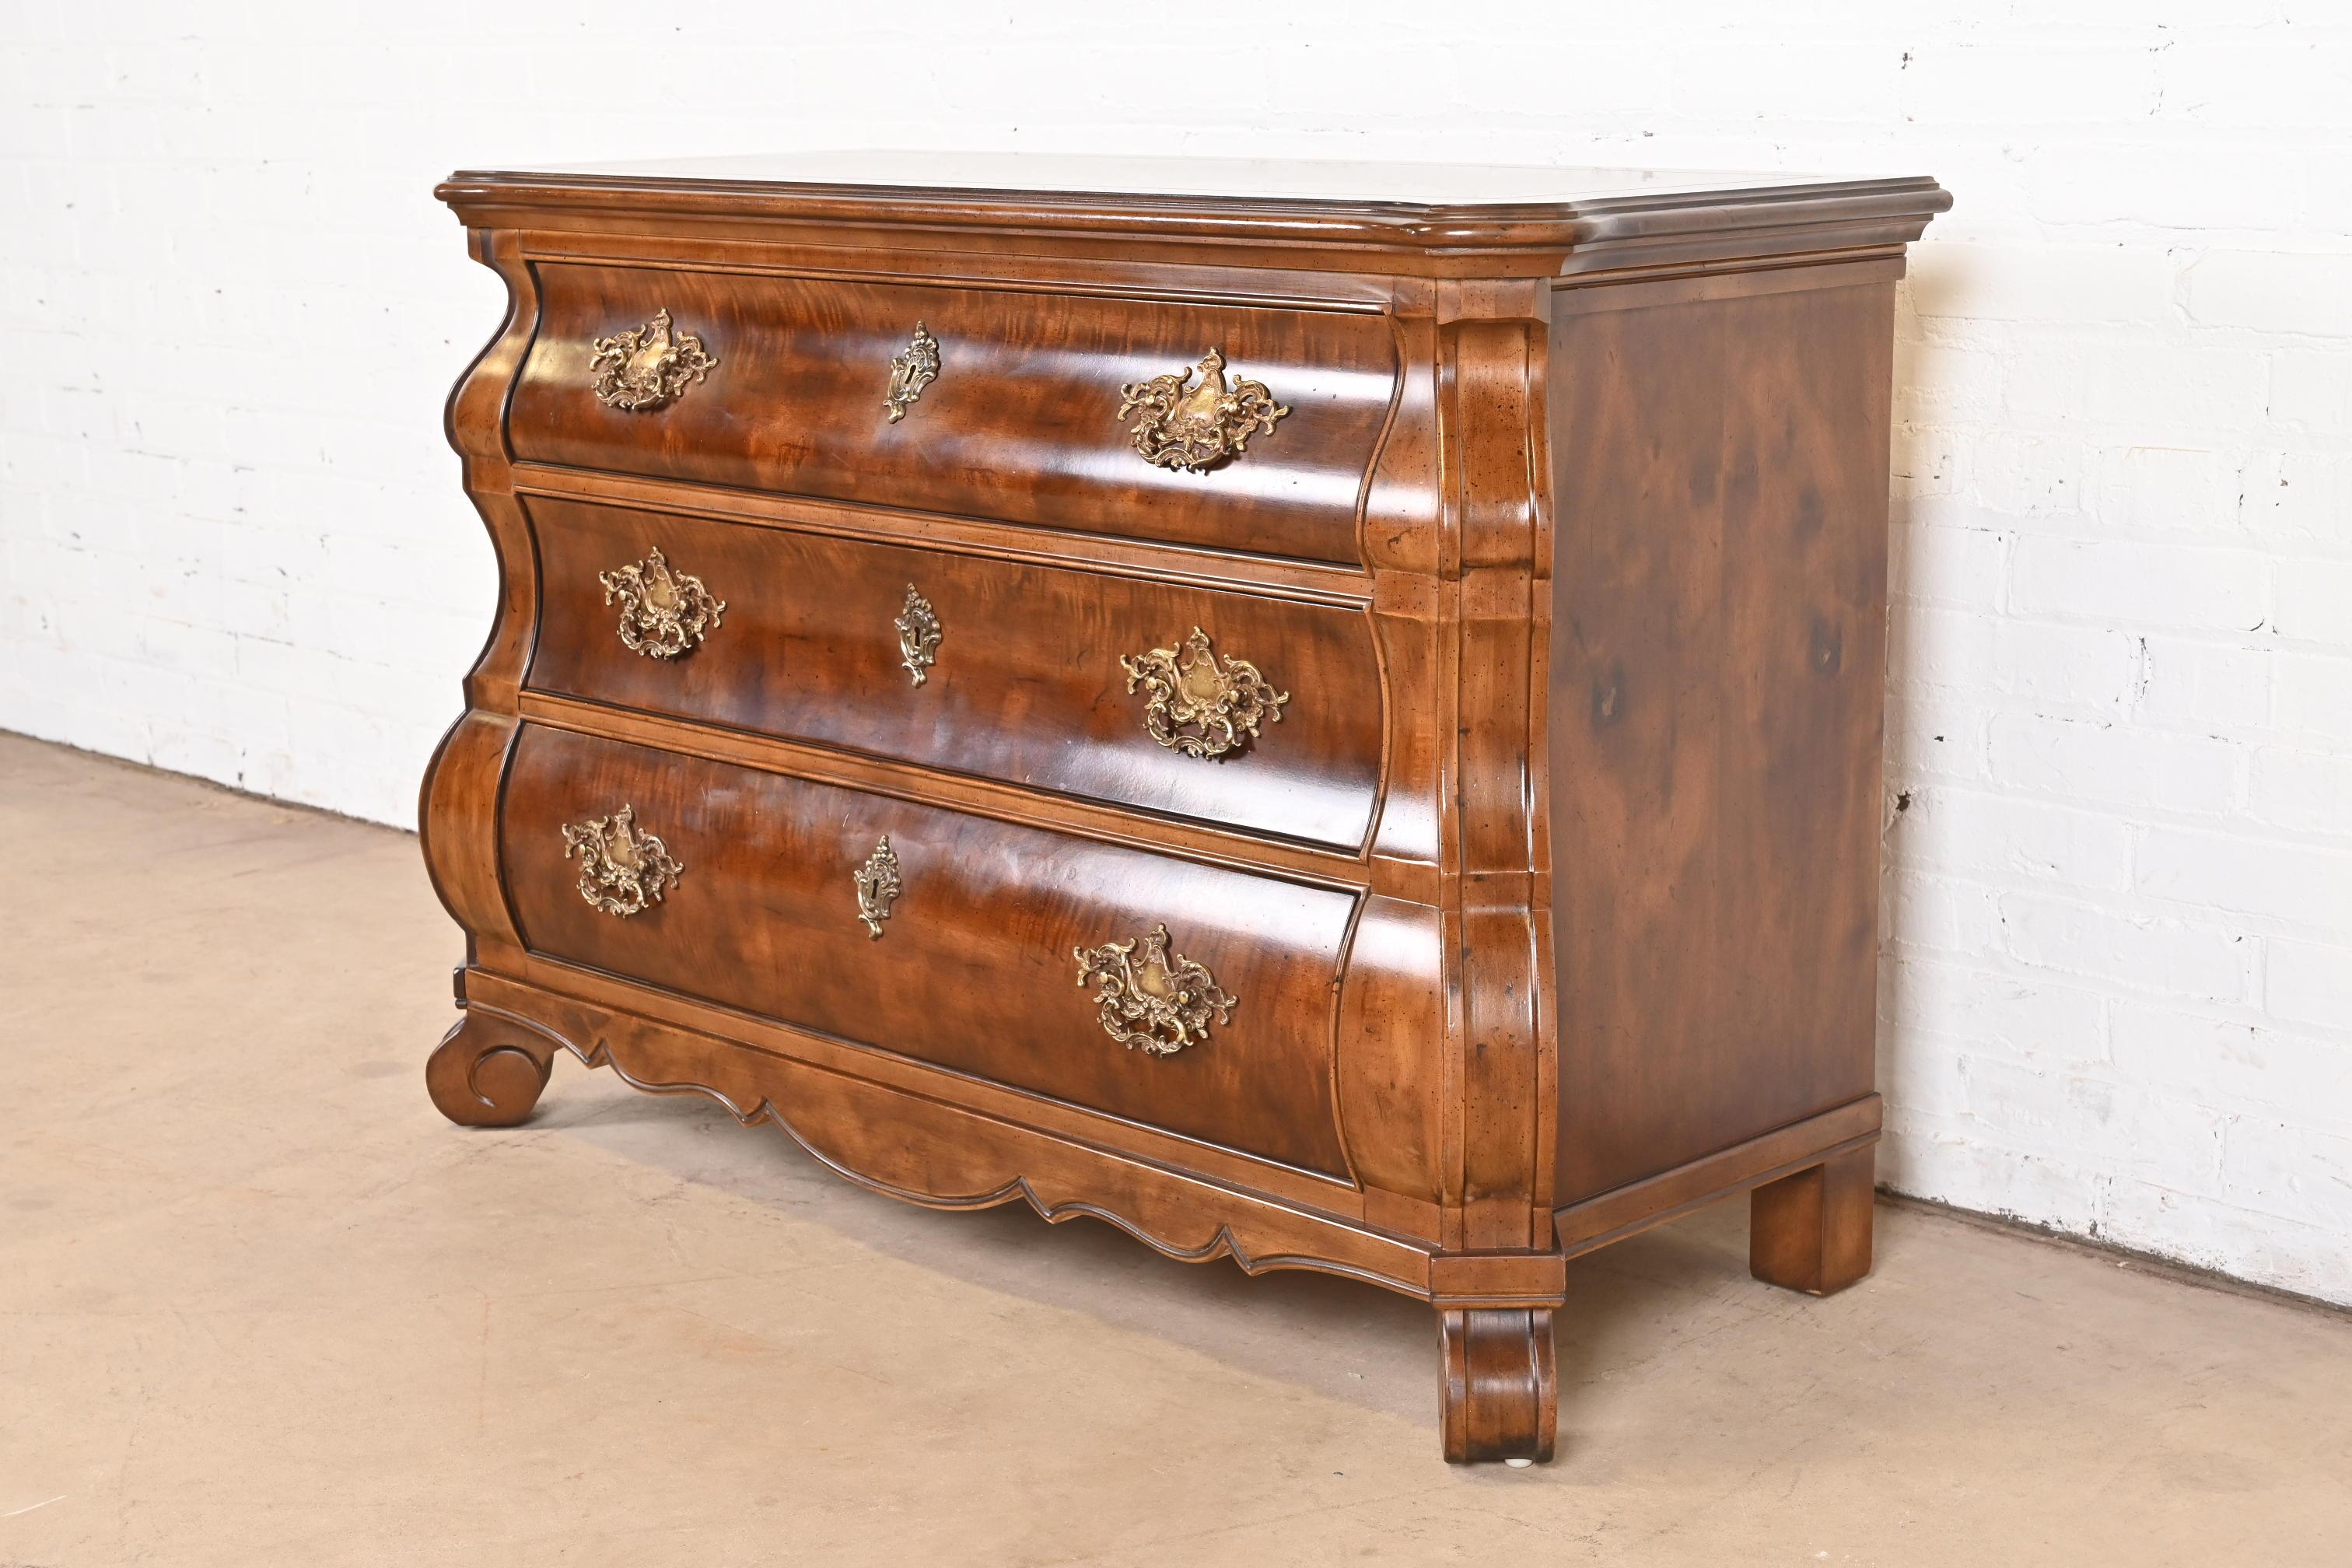 Henredon Italian Baroque Burled Mahogany Bombay Chest or Commode In Good Condition For Sale In South Bend, IN